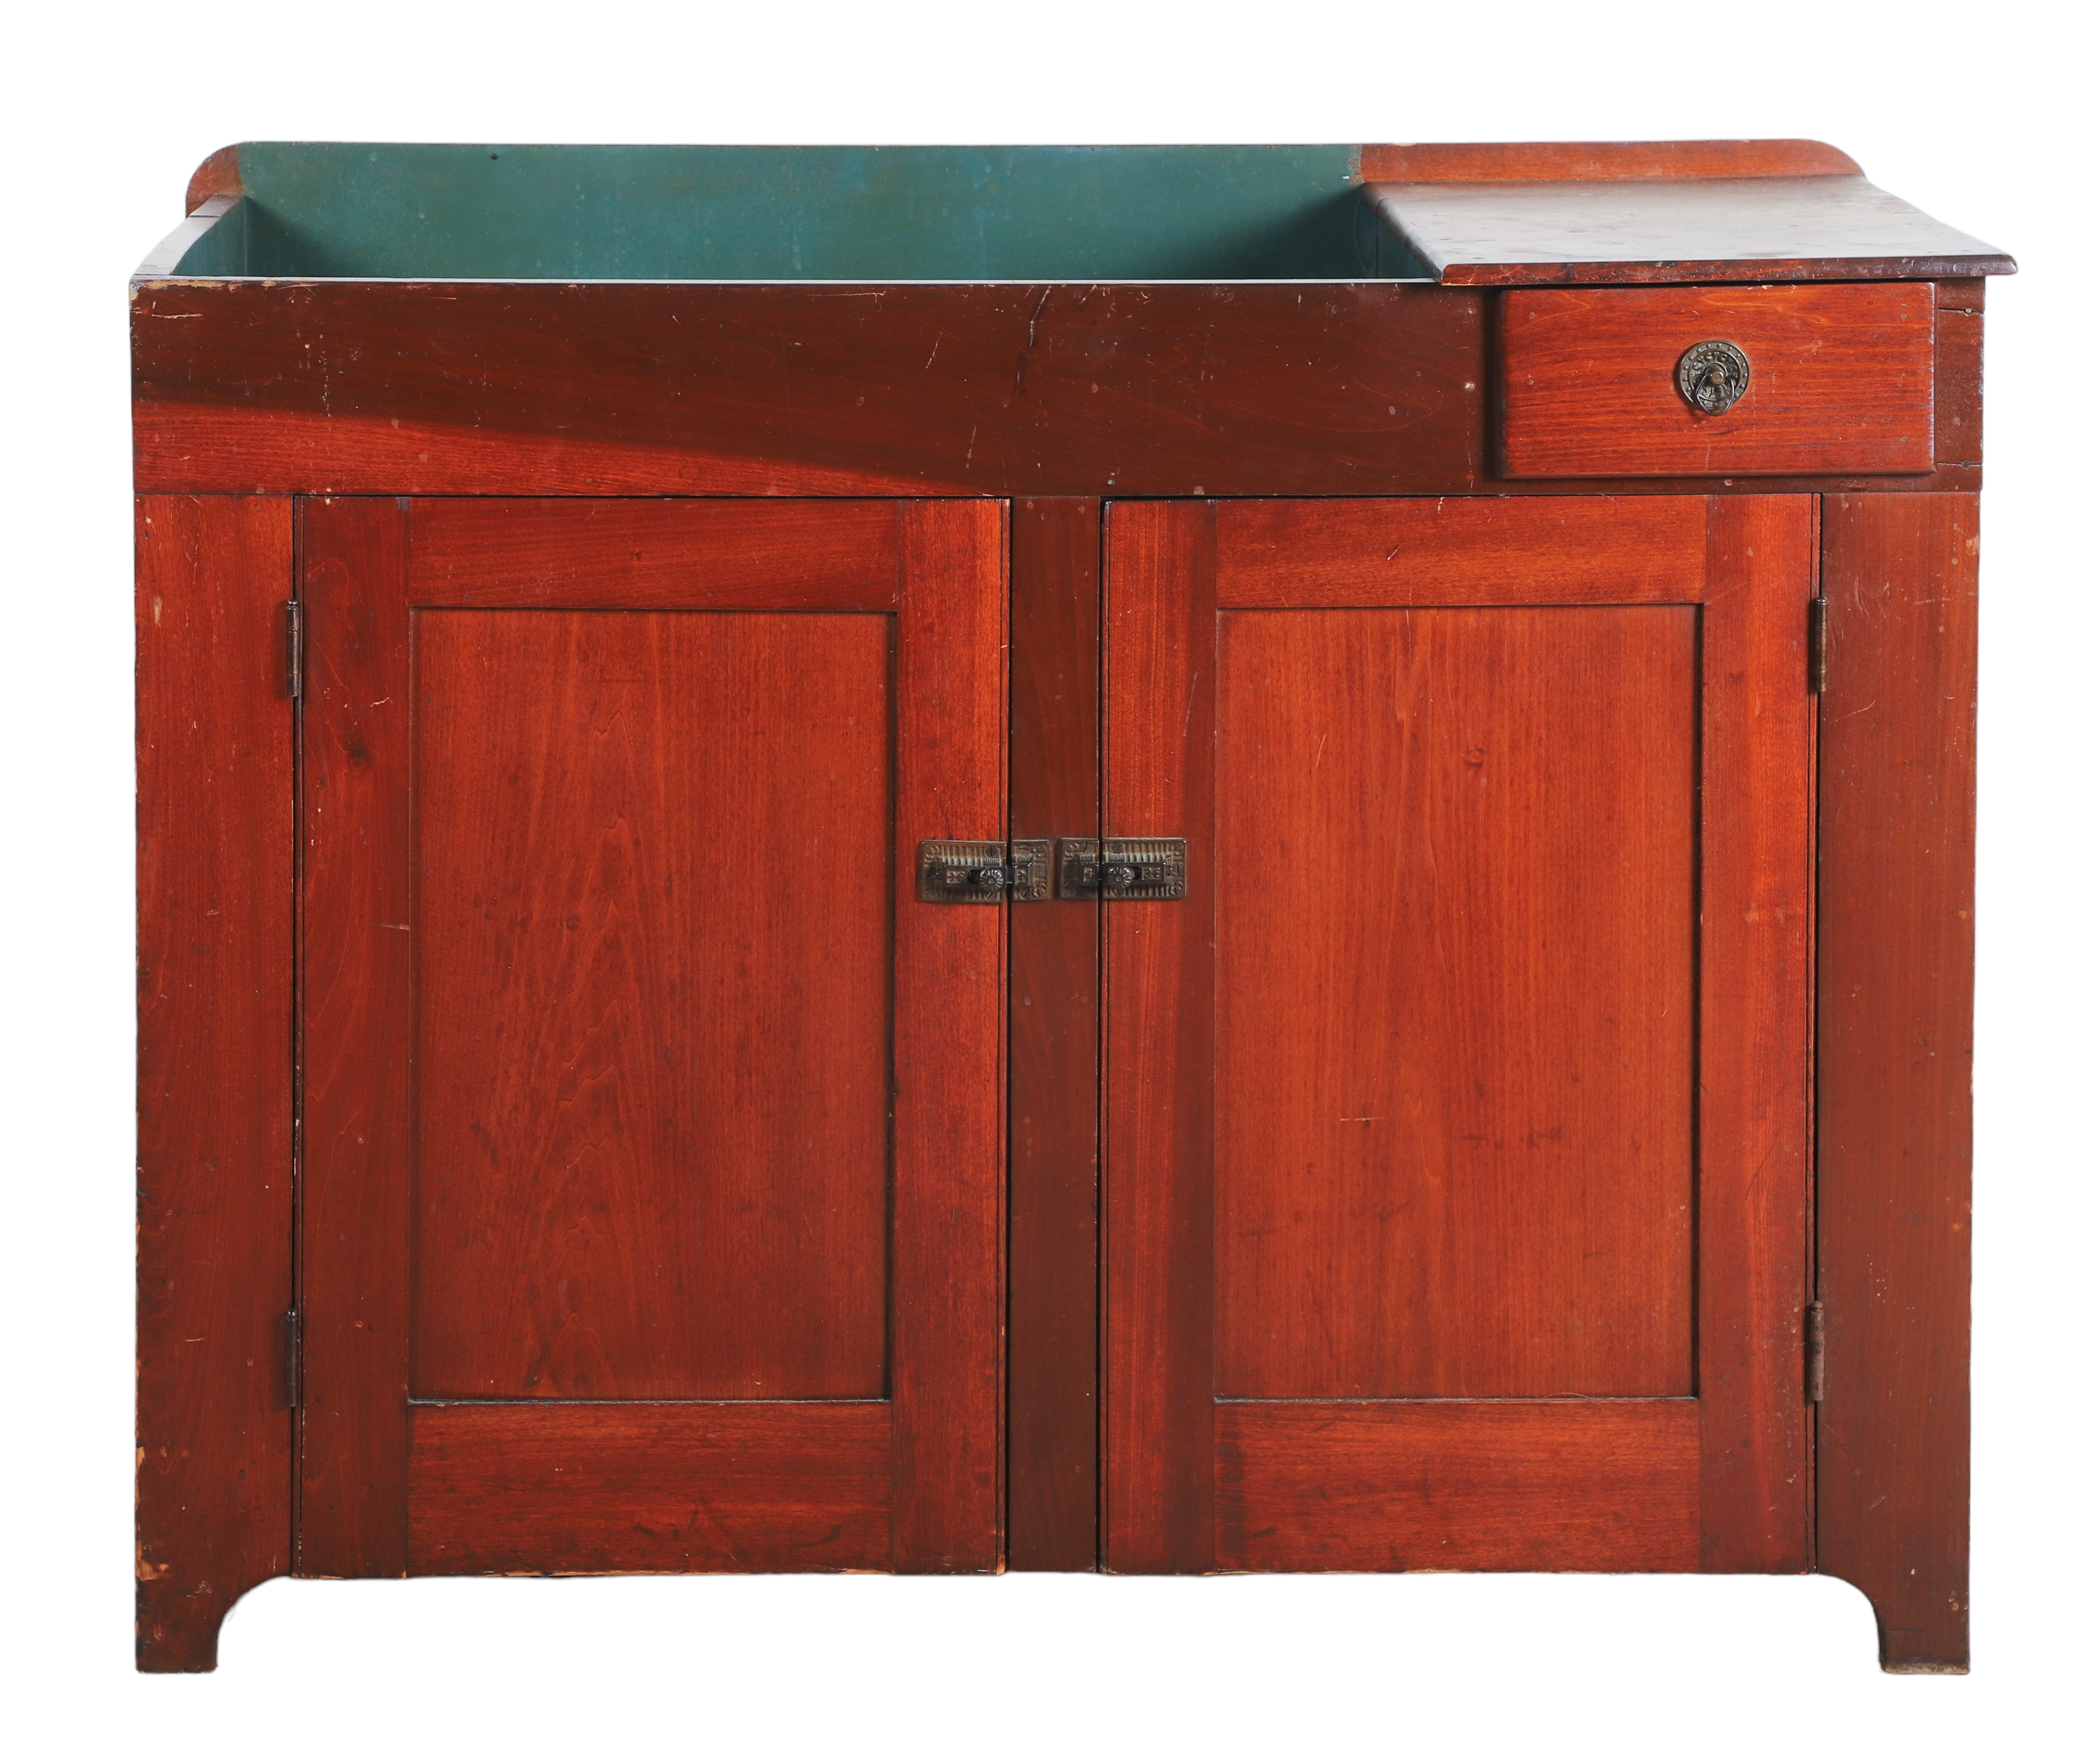 Poplar dry sink open well with 3b1806